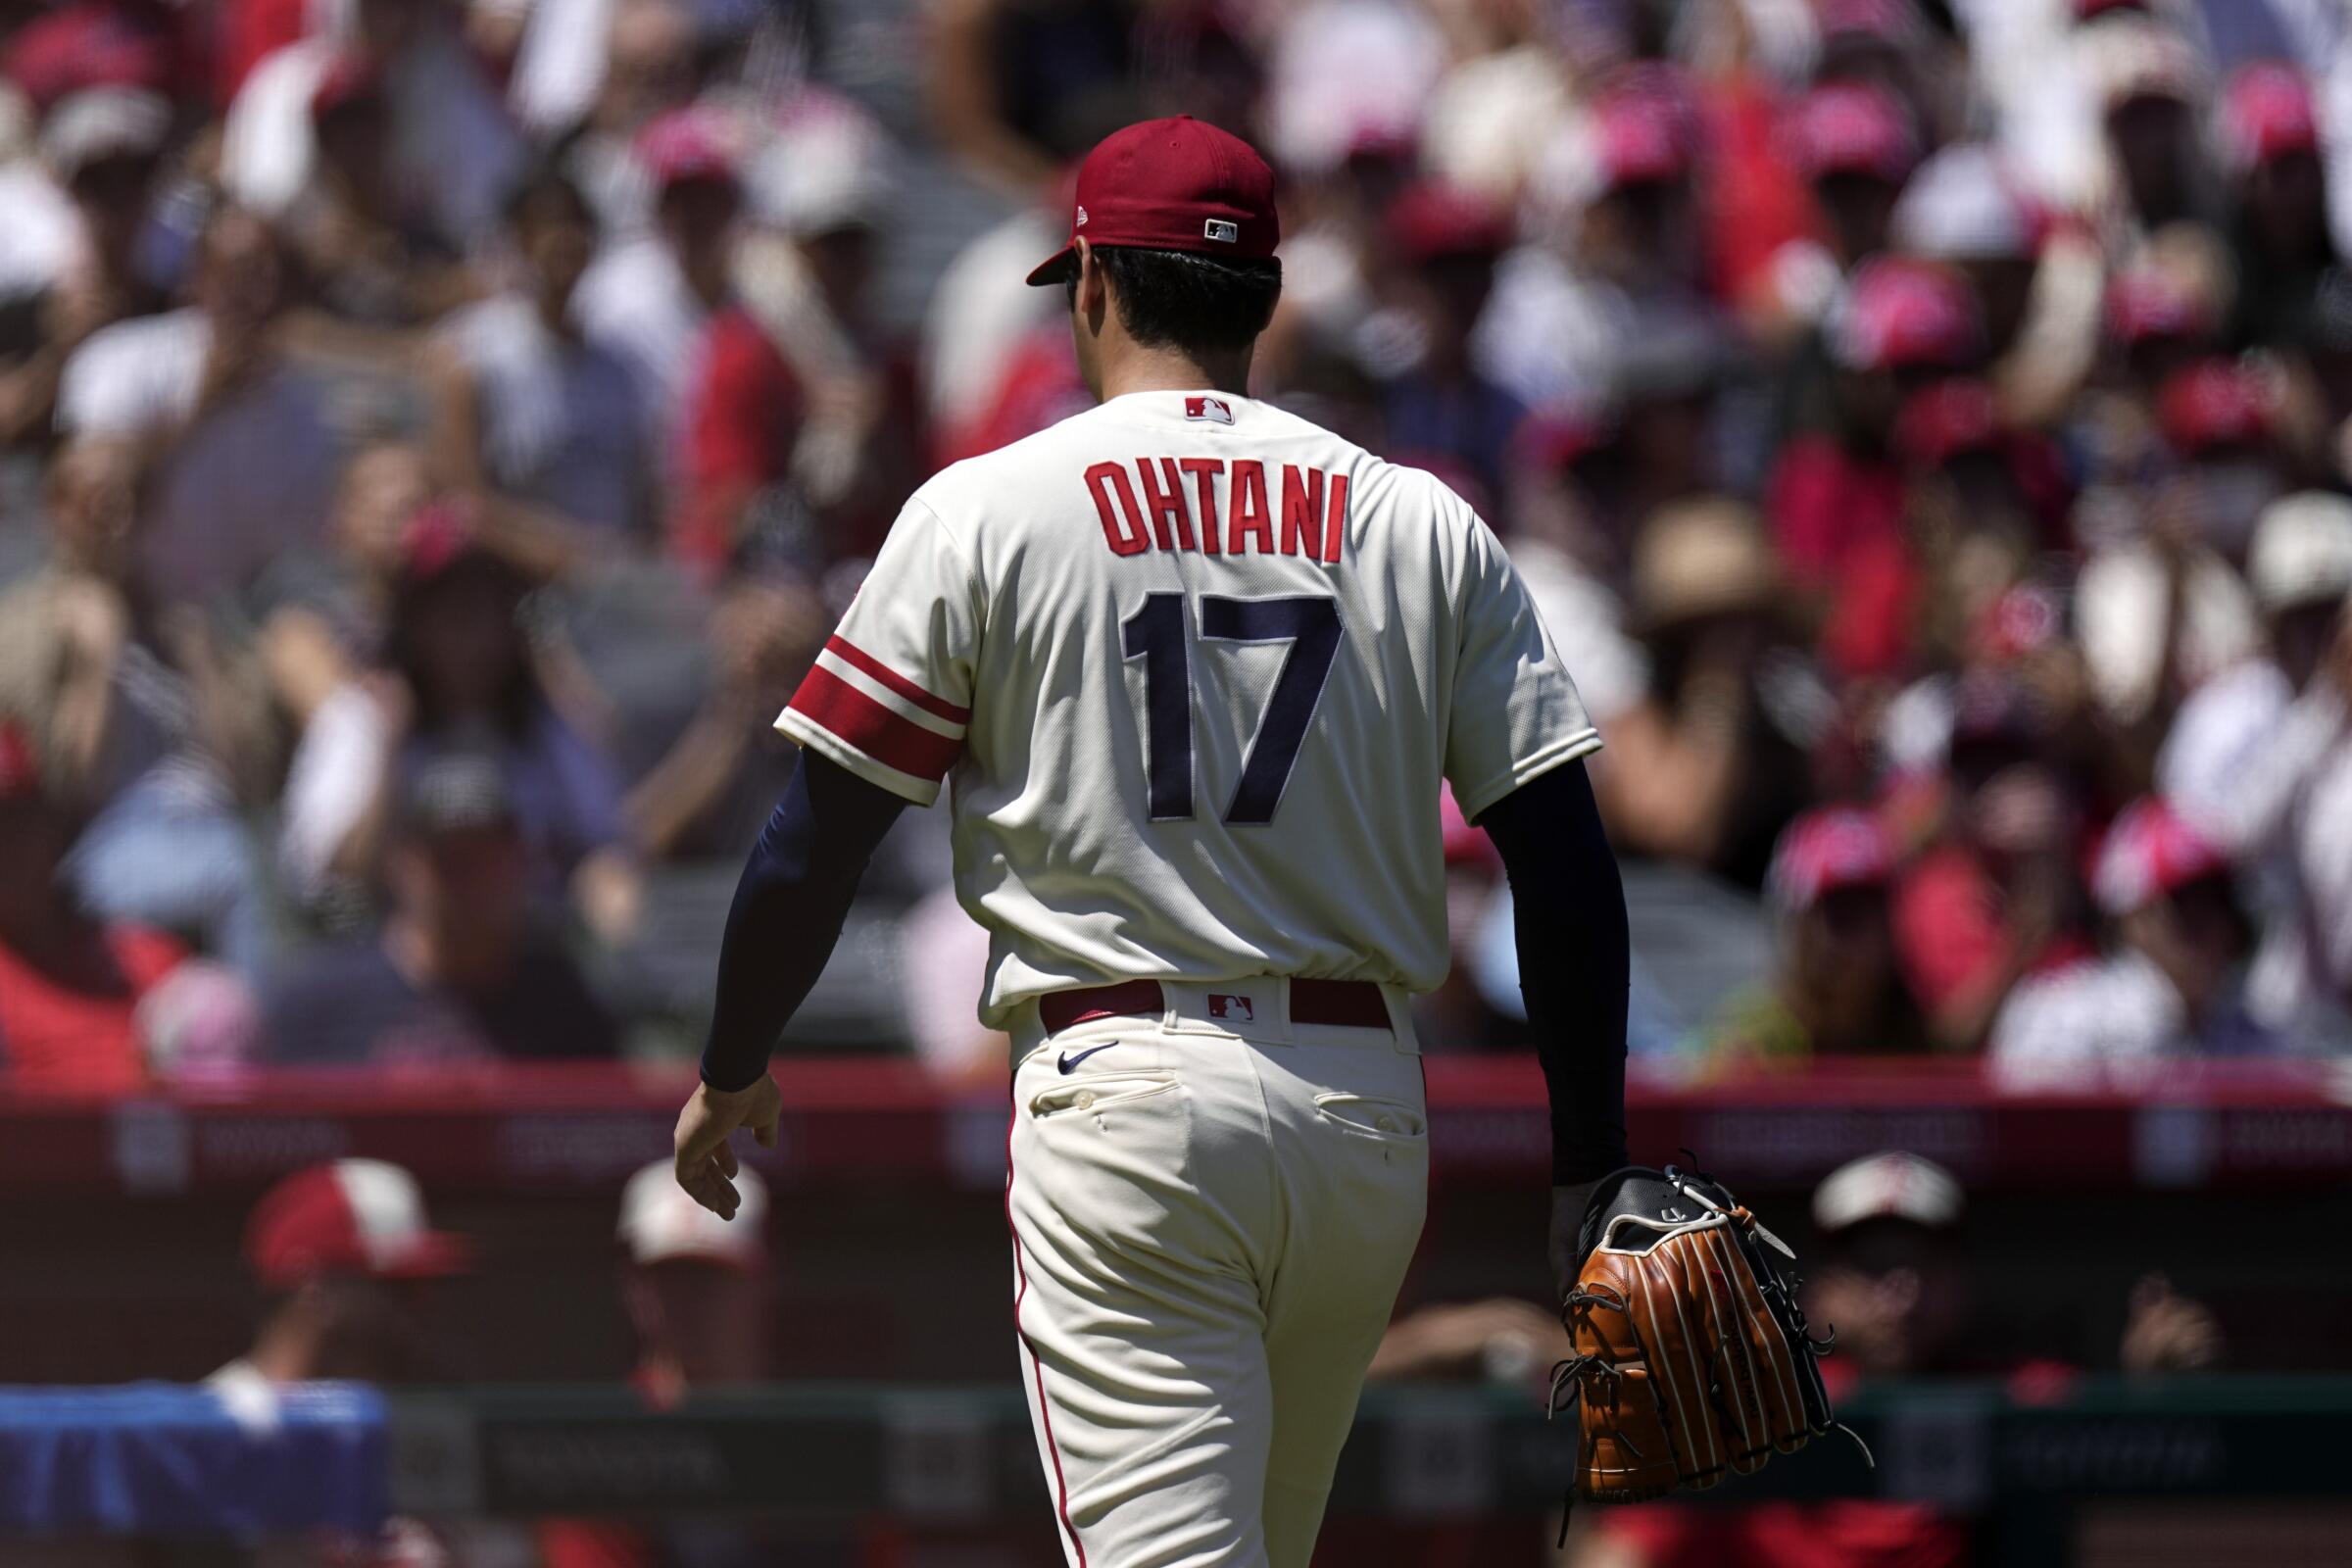 Angels pitcher Shohei Ohtani walks off the field after being taken out during the first game of a dobleheader Wednesday.